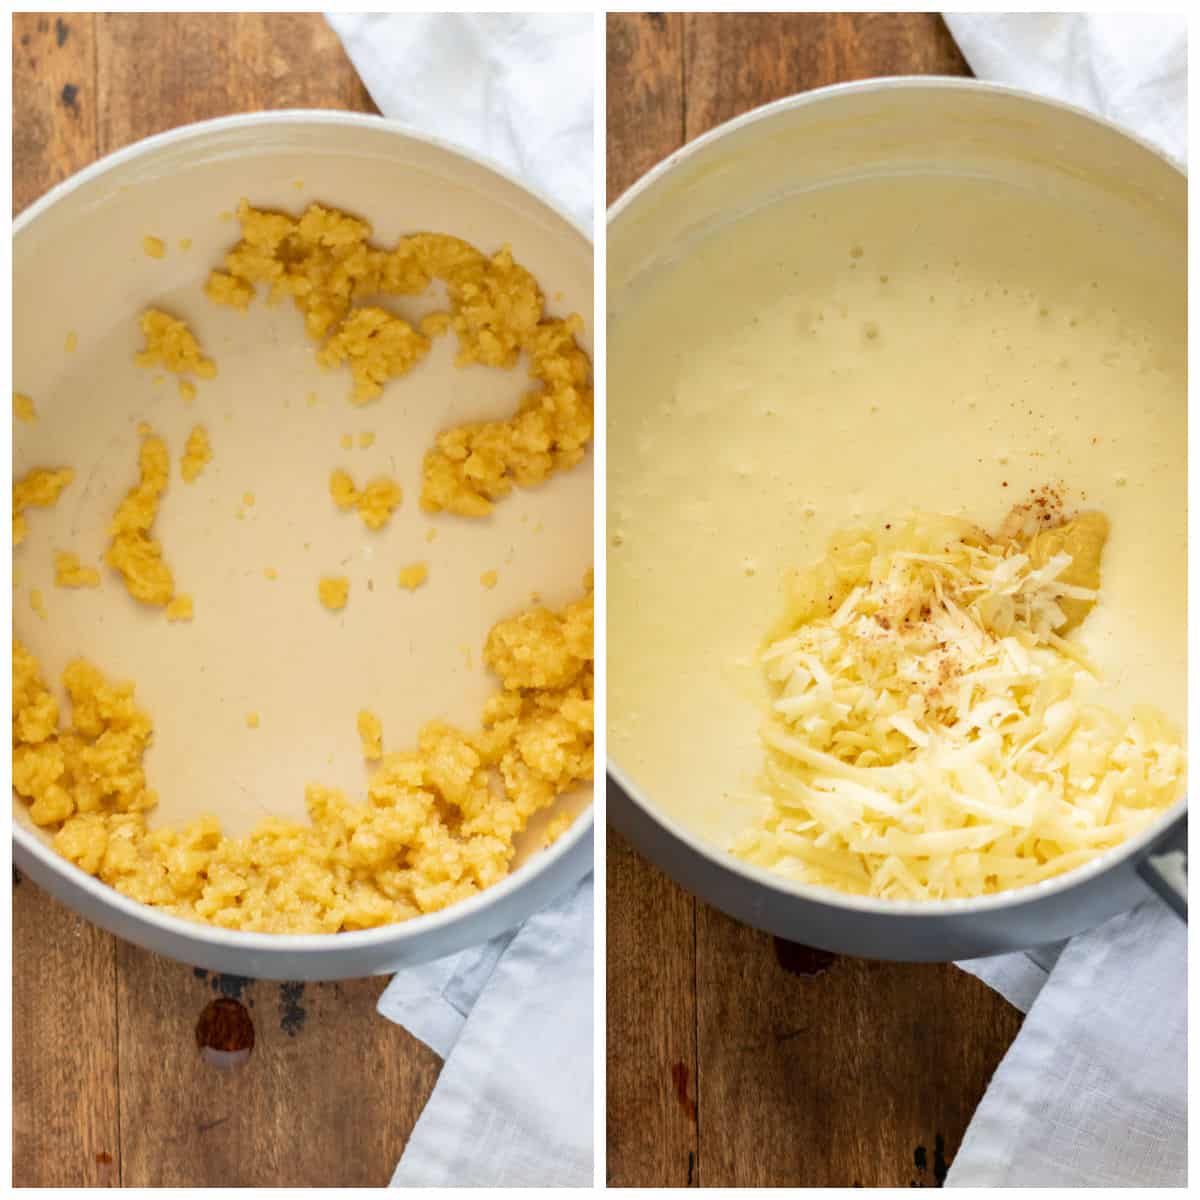 Pot with butter and flour mixed together, then milk and cheese added.